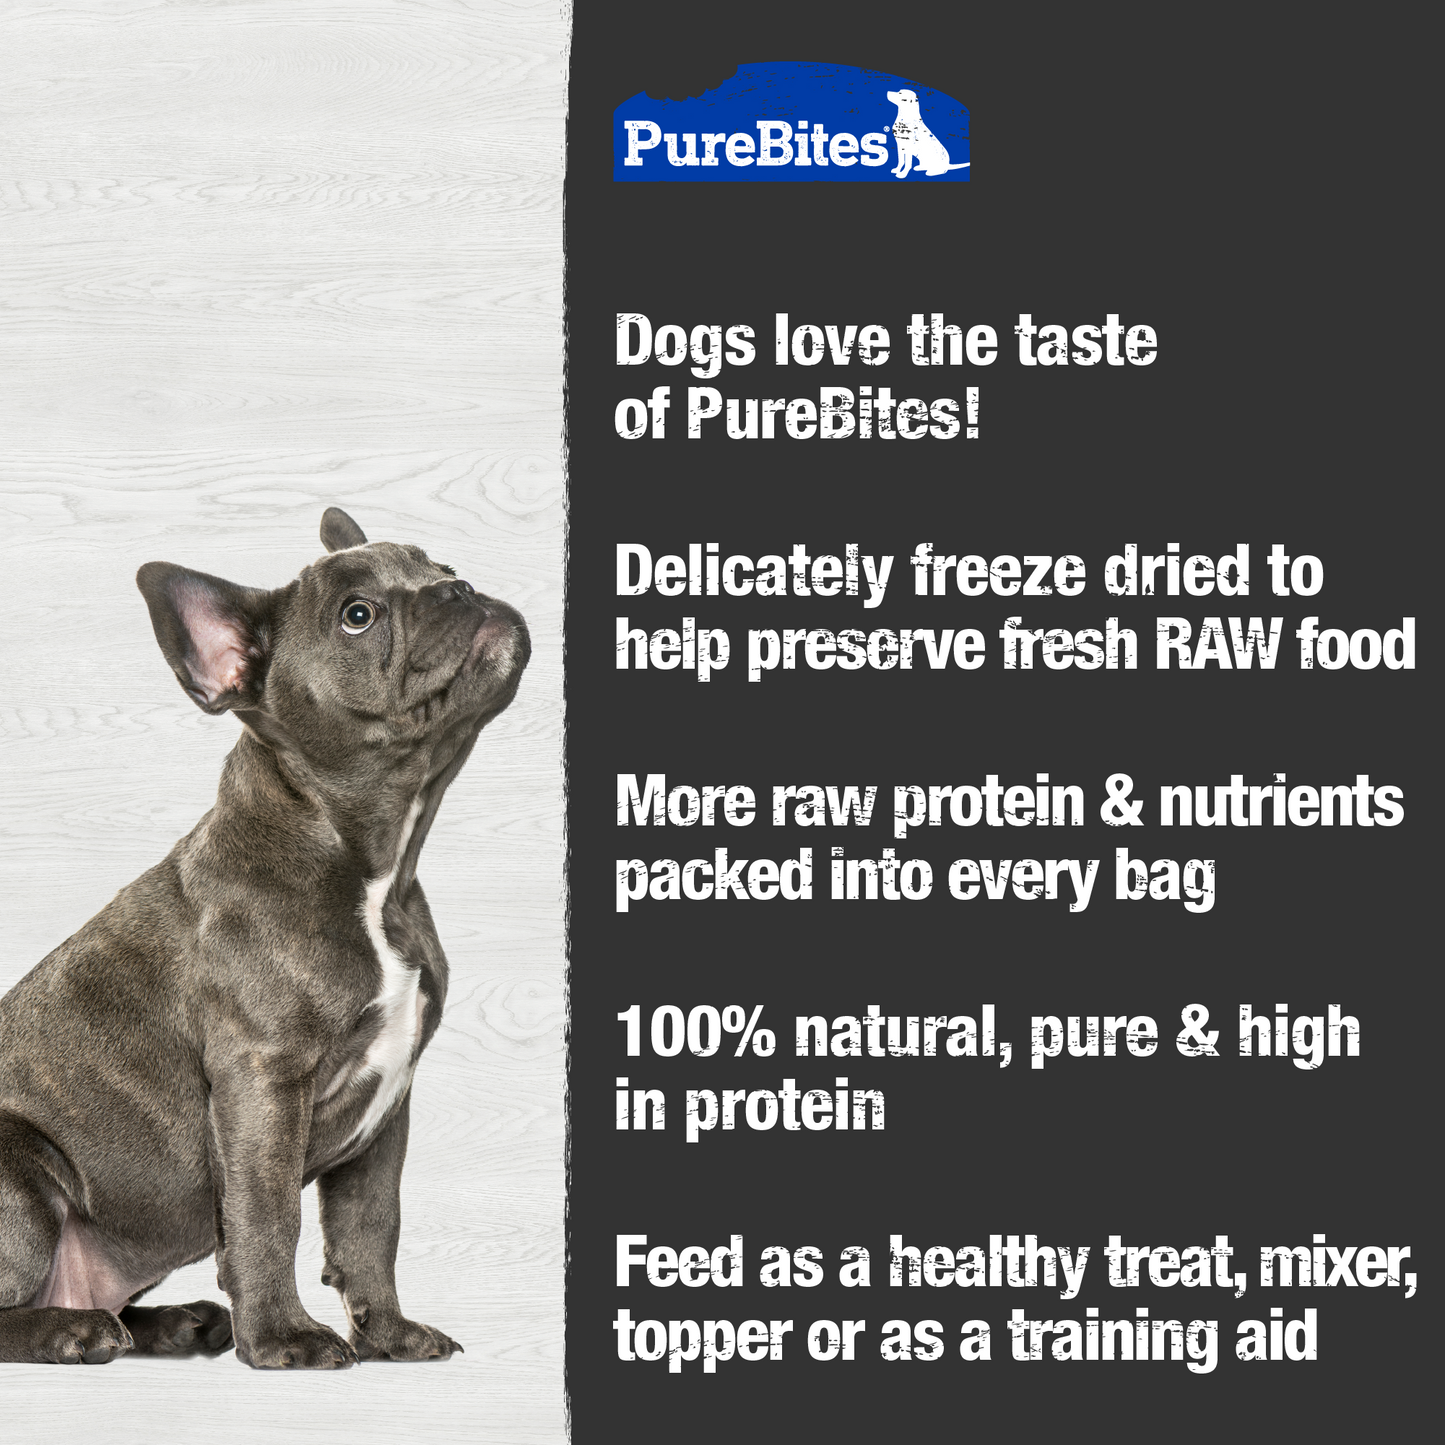 Made fresh & pure means more RAW protein and nutrients packed into every bag. Our cheddar cheese  is freeze dried to help preserve its RAW taste, and nutrition, and mirror a dog’s ancestral diet